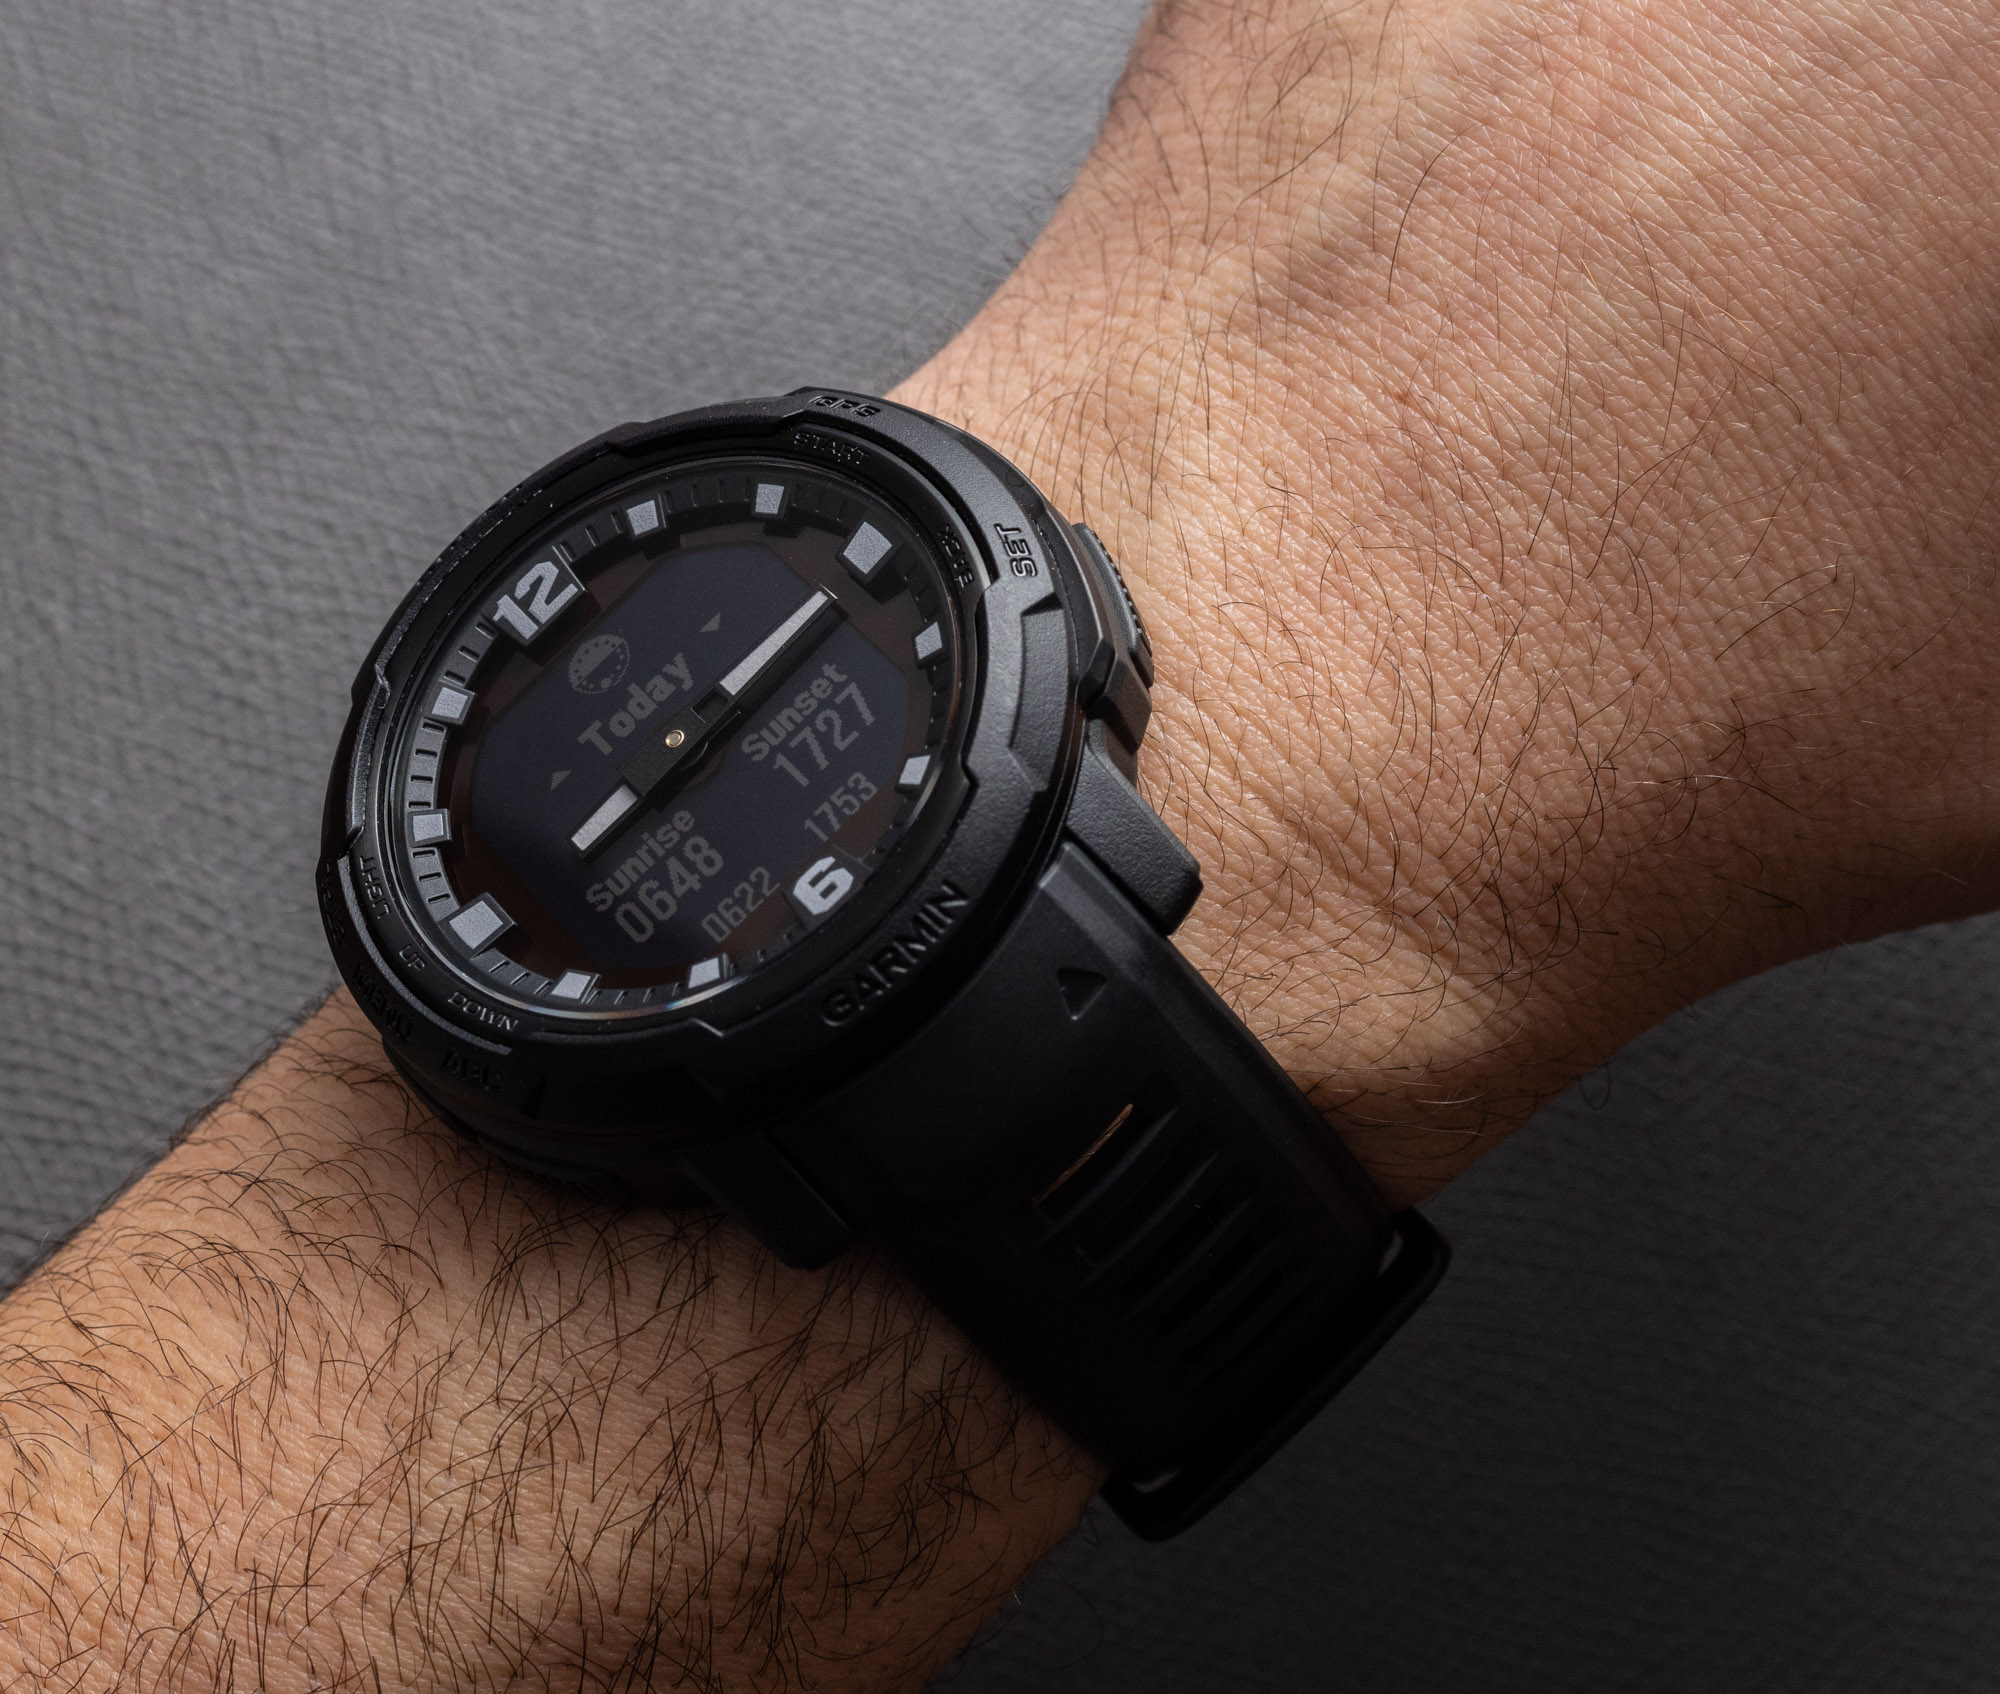 Garmin's New Solar-Powered Watch Promises 70-Day Battery Life - CNET